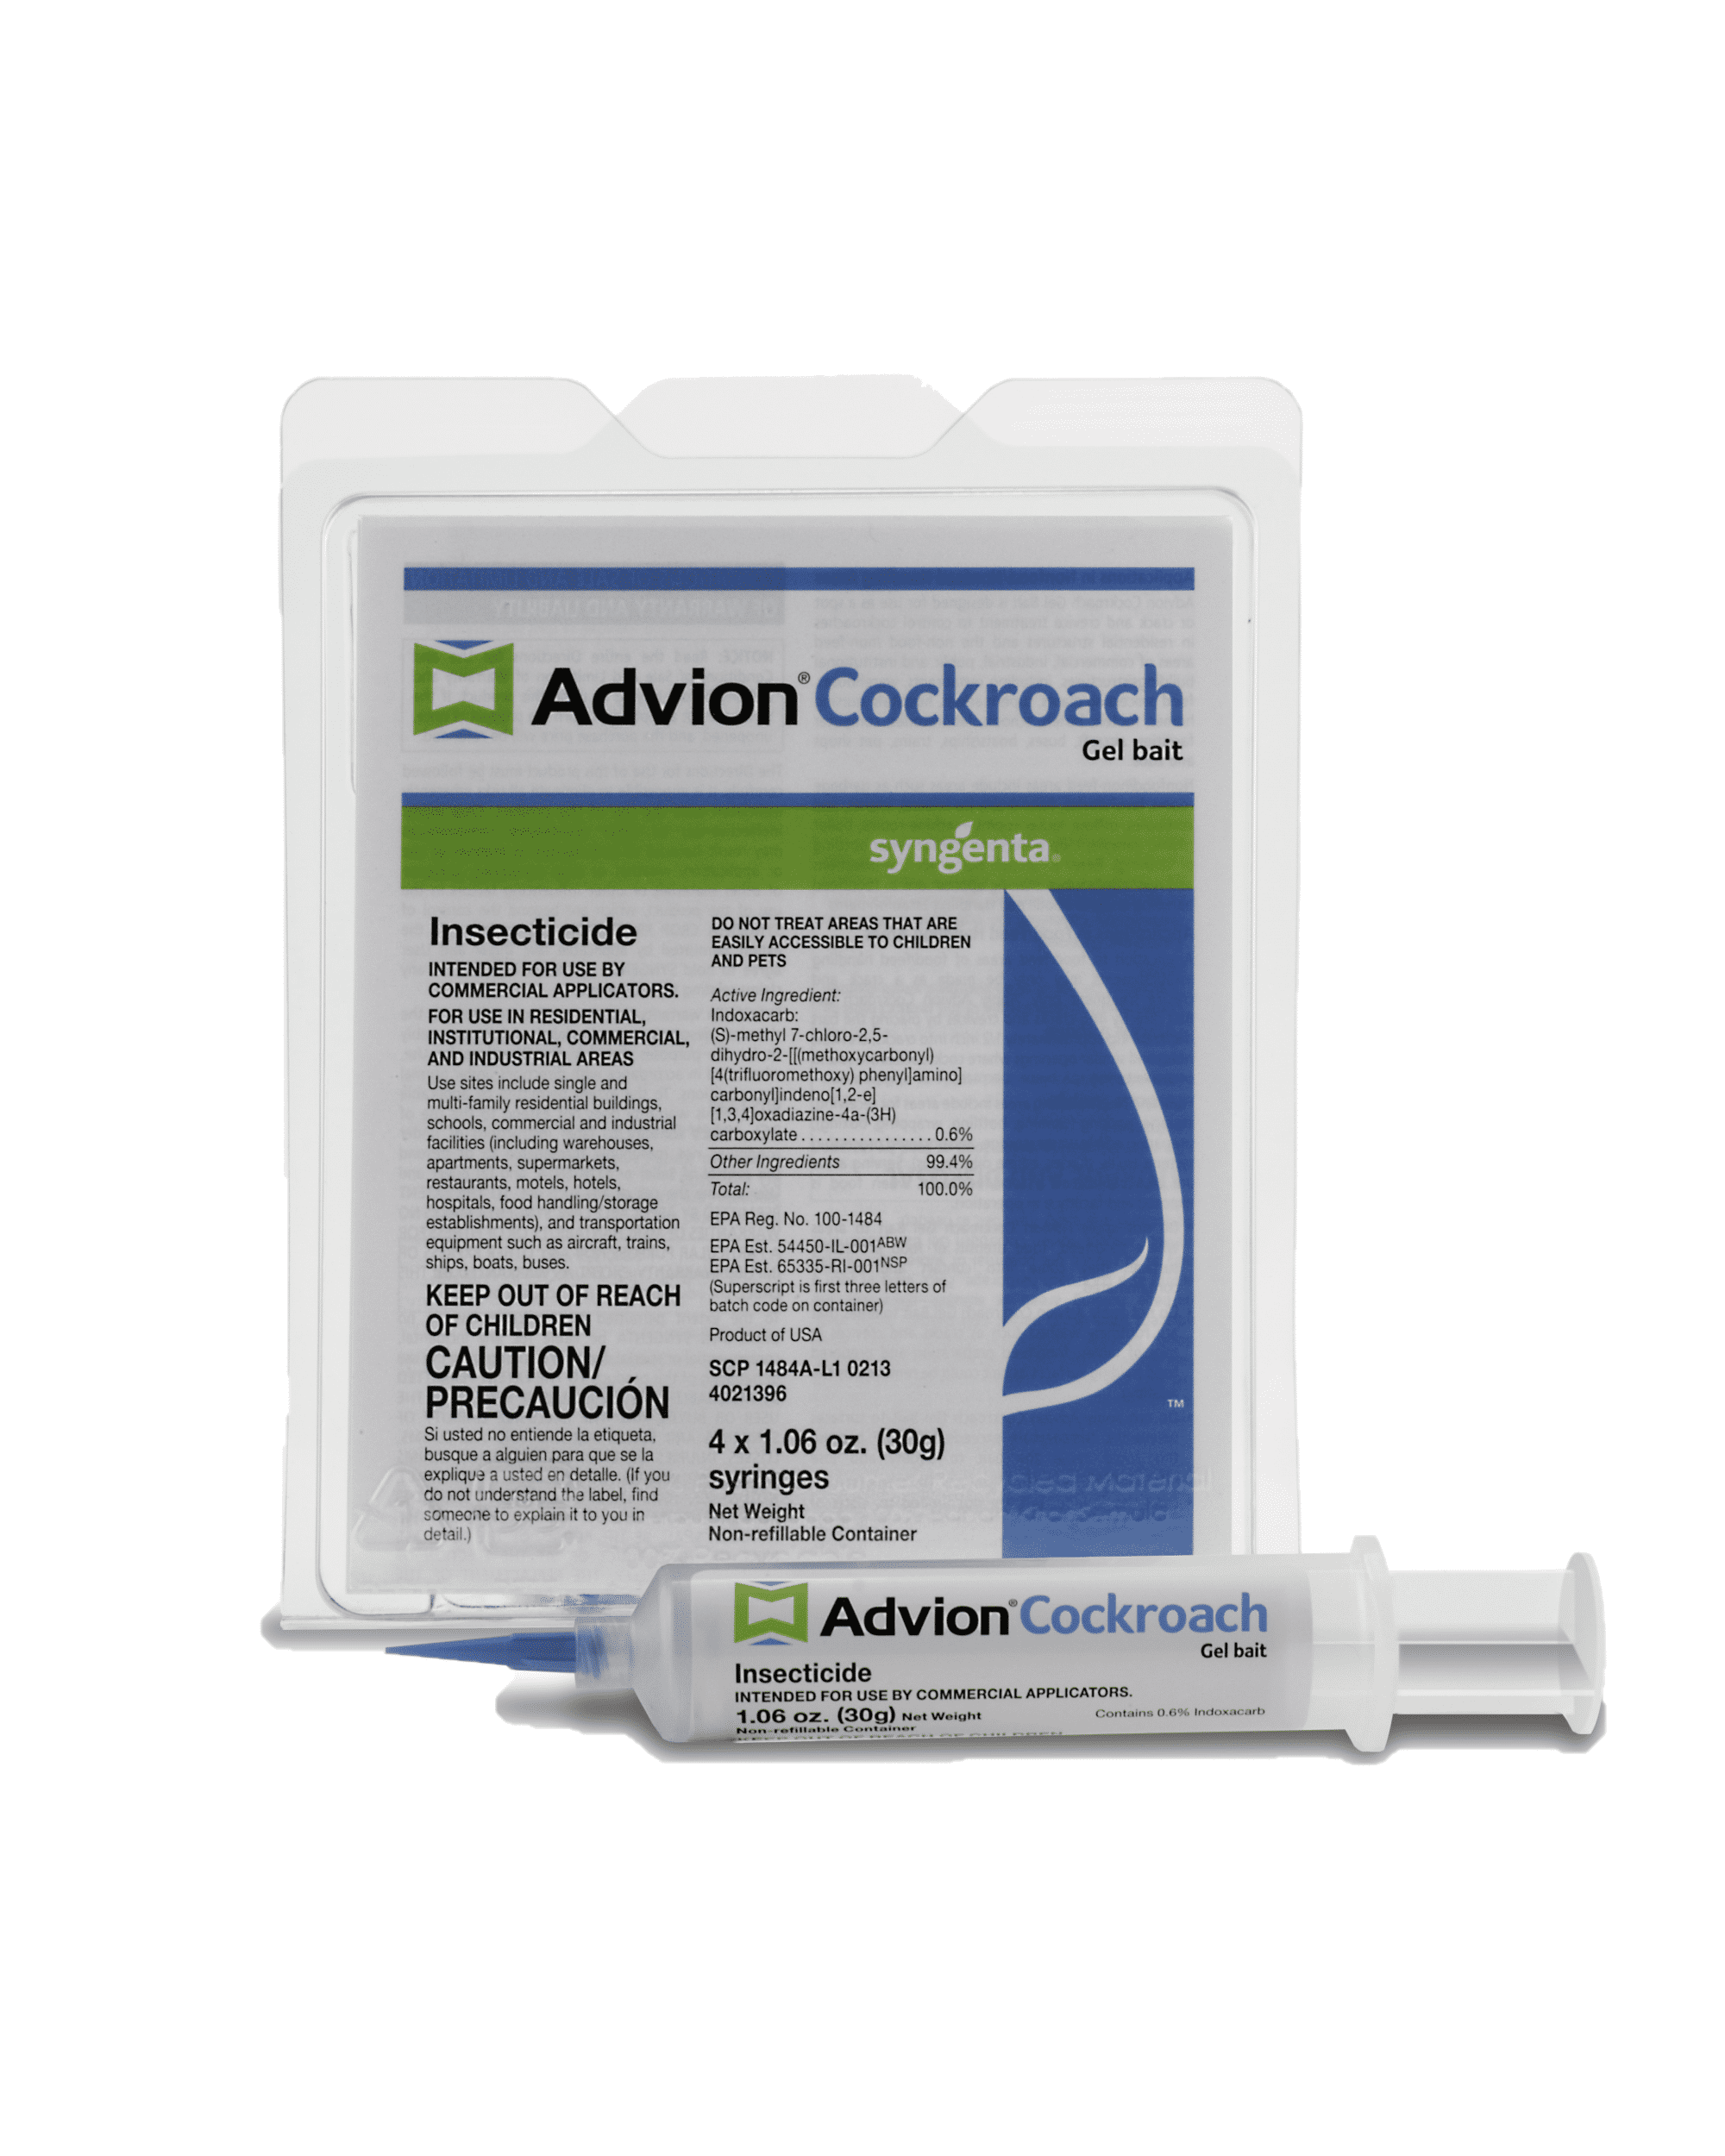 Advion Cockroach Gel Bait -1 Case (5 Packs of 4 x 30g Tubes) for Indoor/Outdoor Use by Syngenta, Yellow